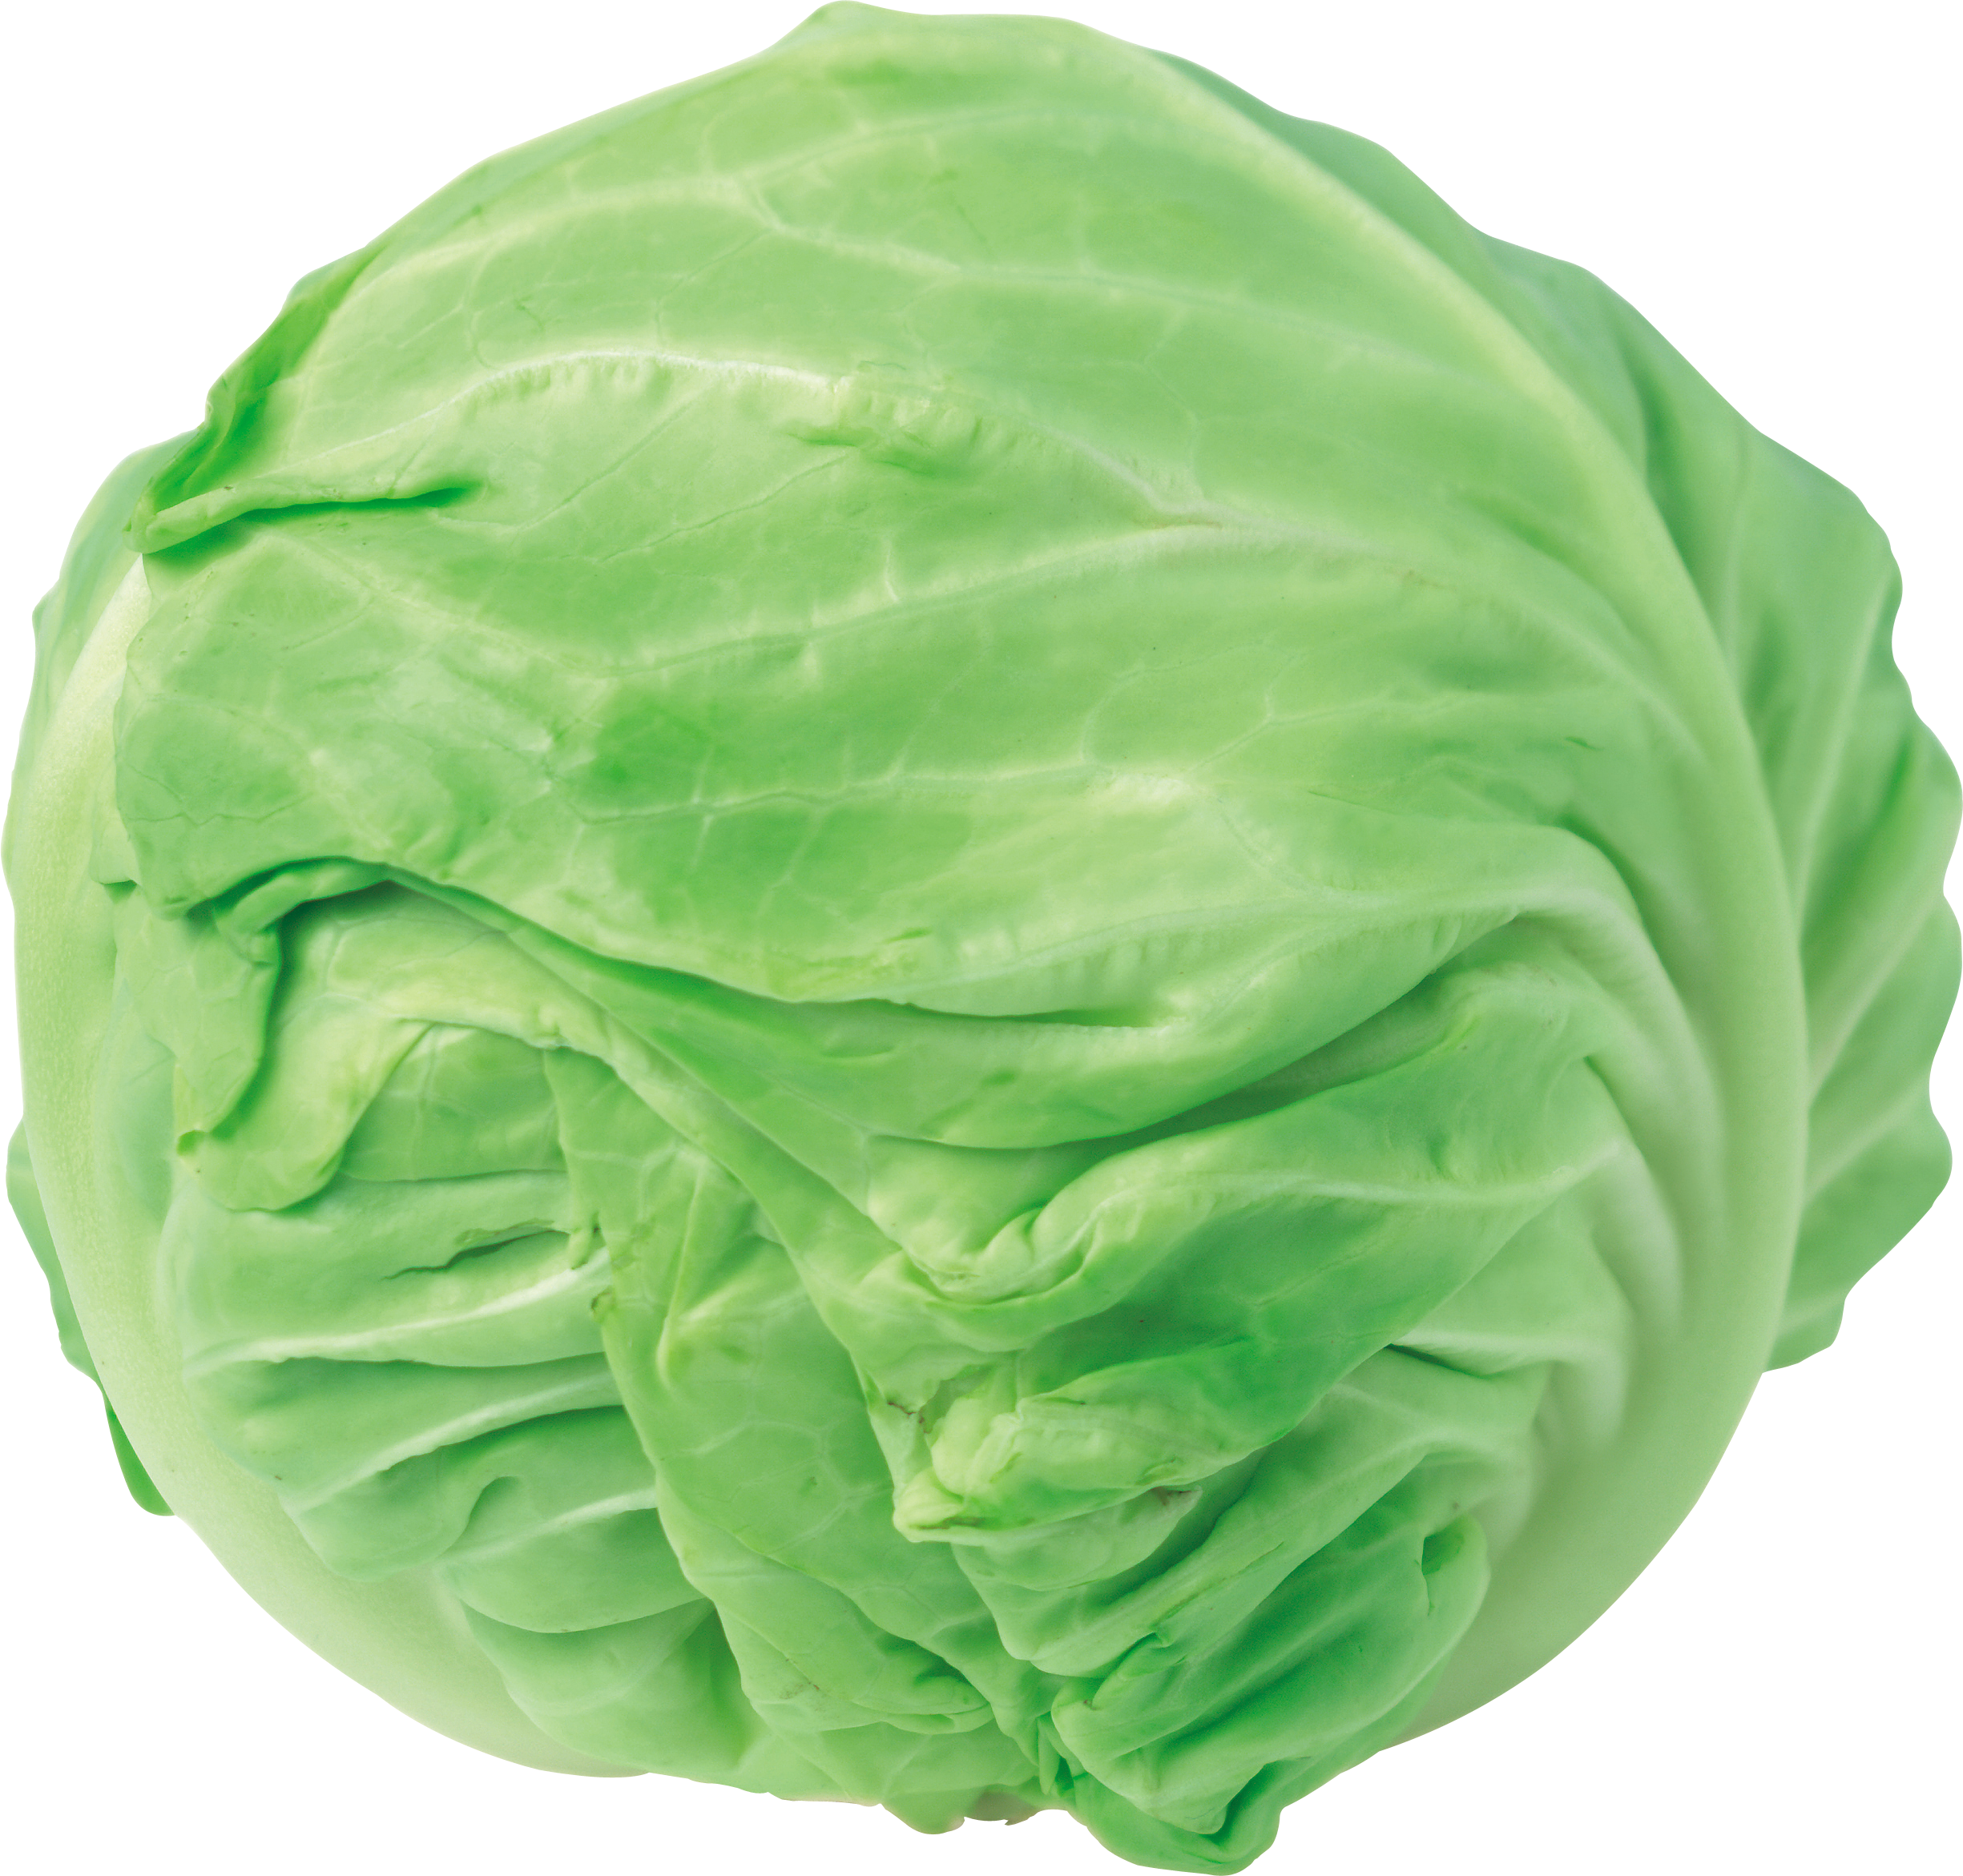 Png image free download. Vegetables clipart cabbage